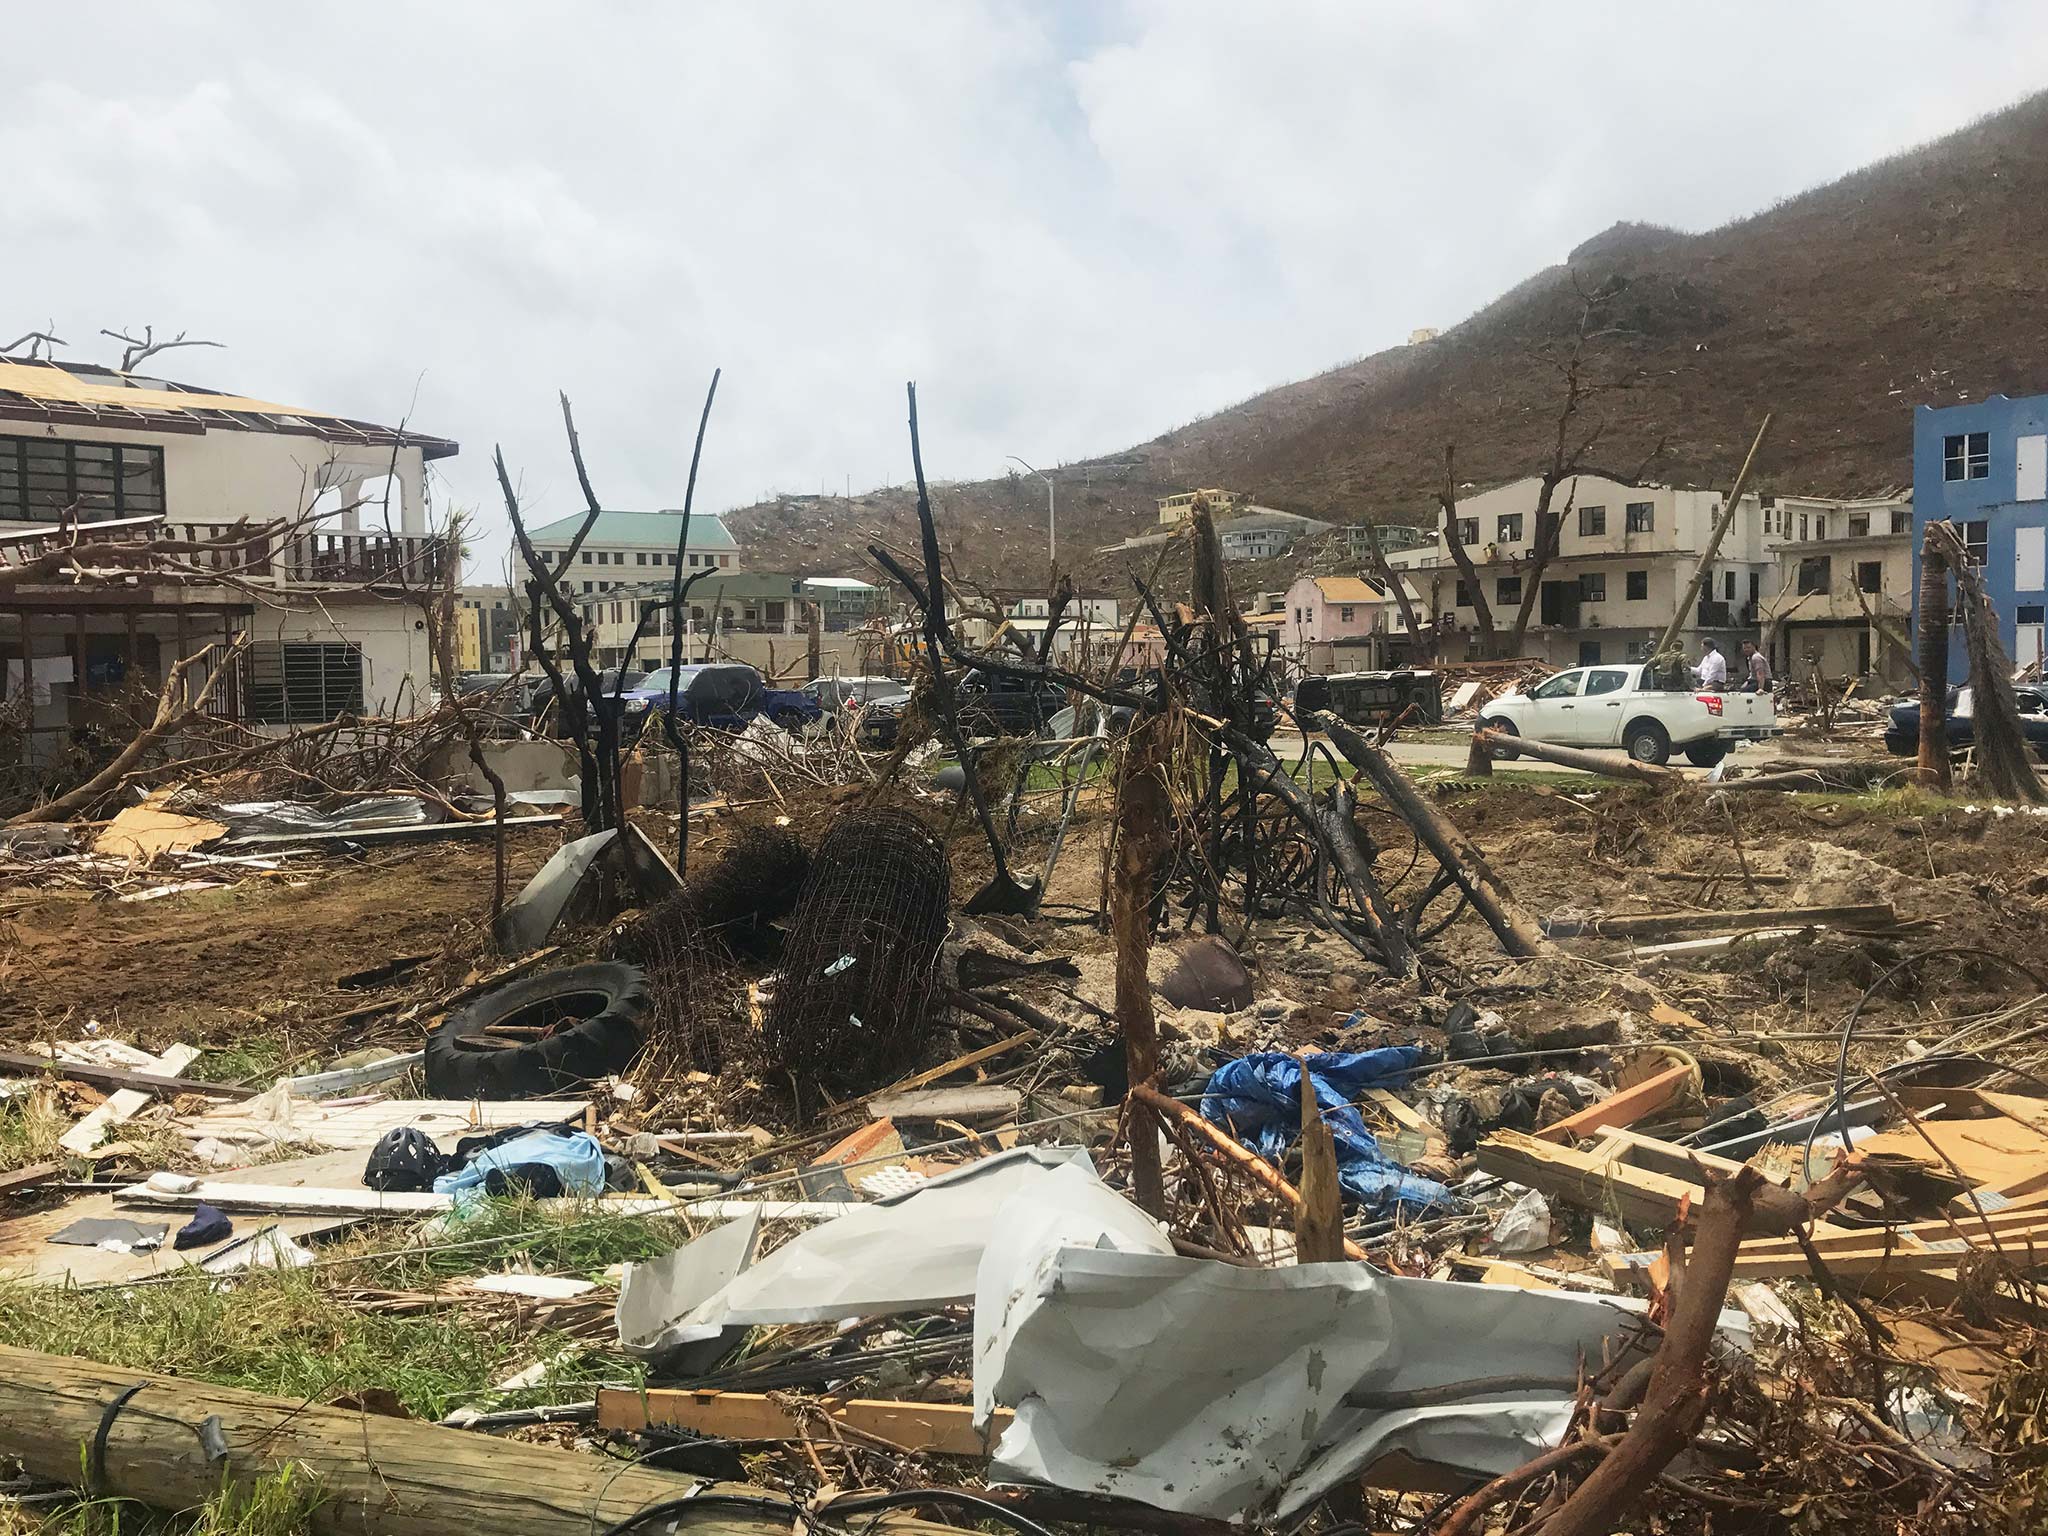 The damage caused by Hurricane Irma, as seen here in the British Virgin Islands, was probably made worse by global warming